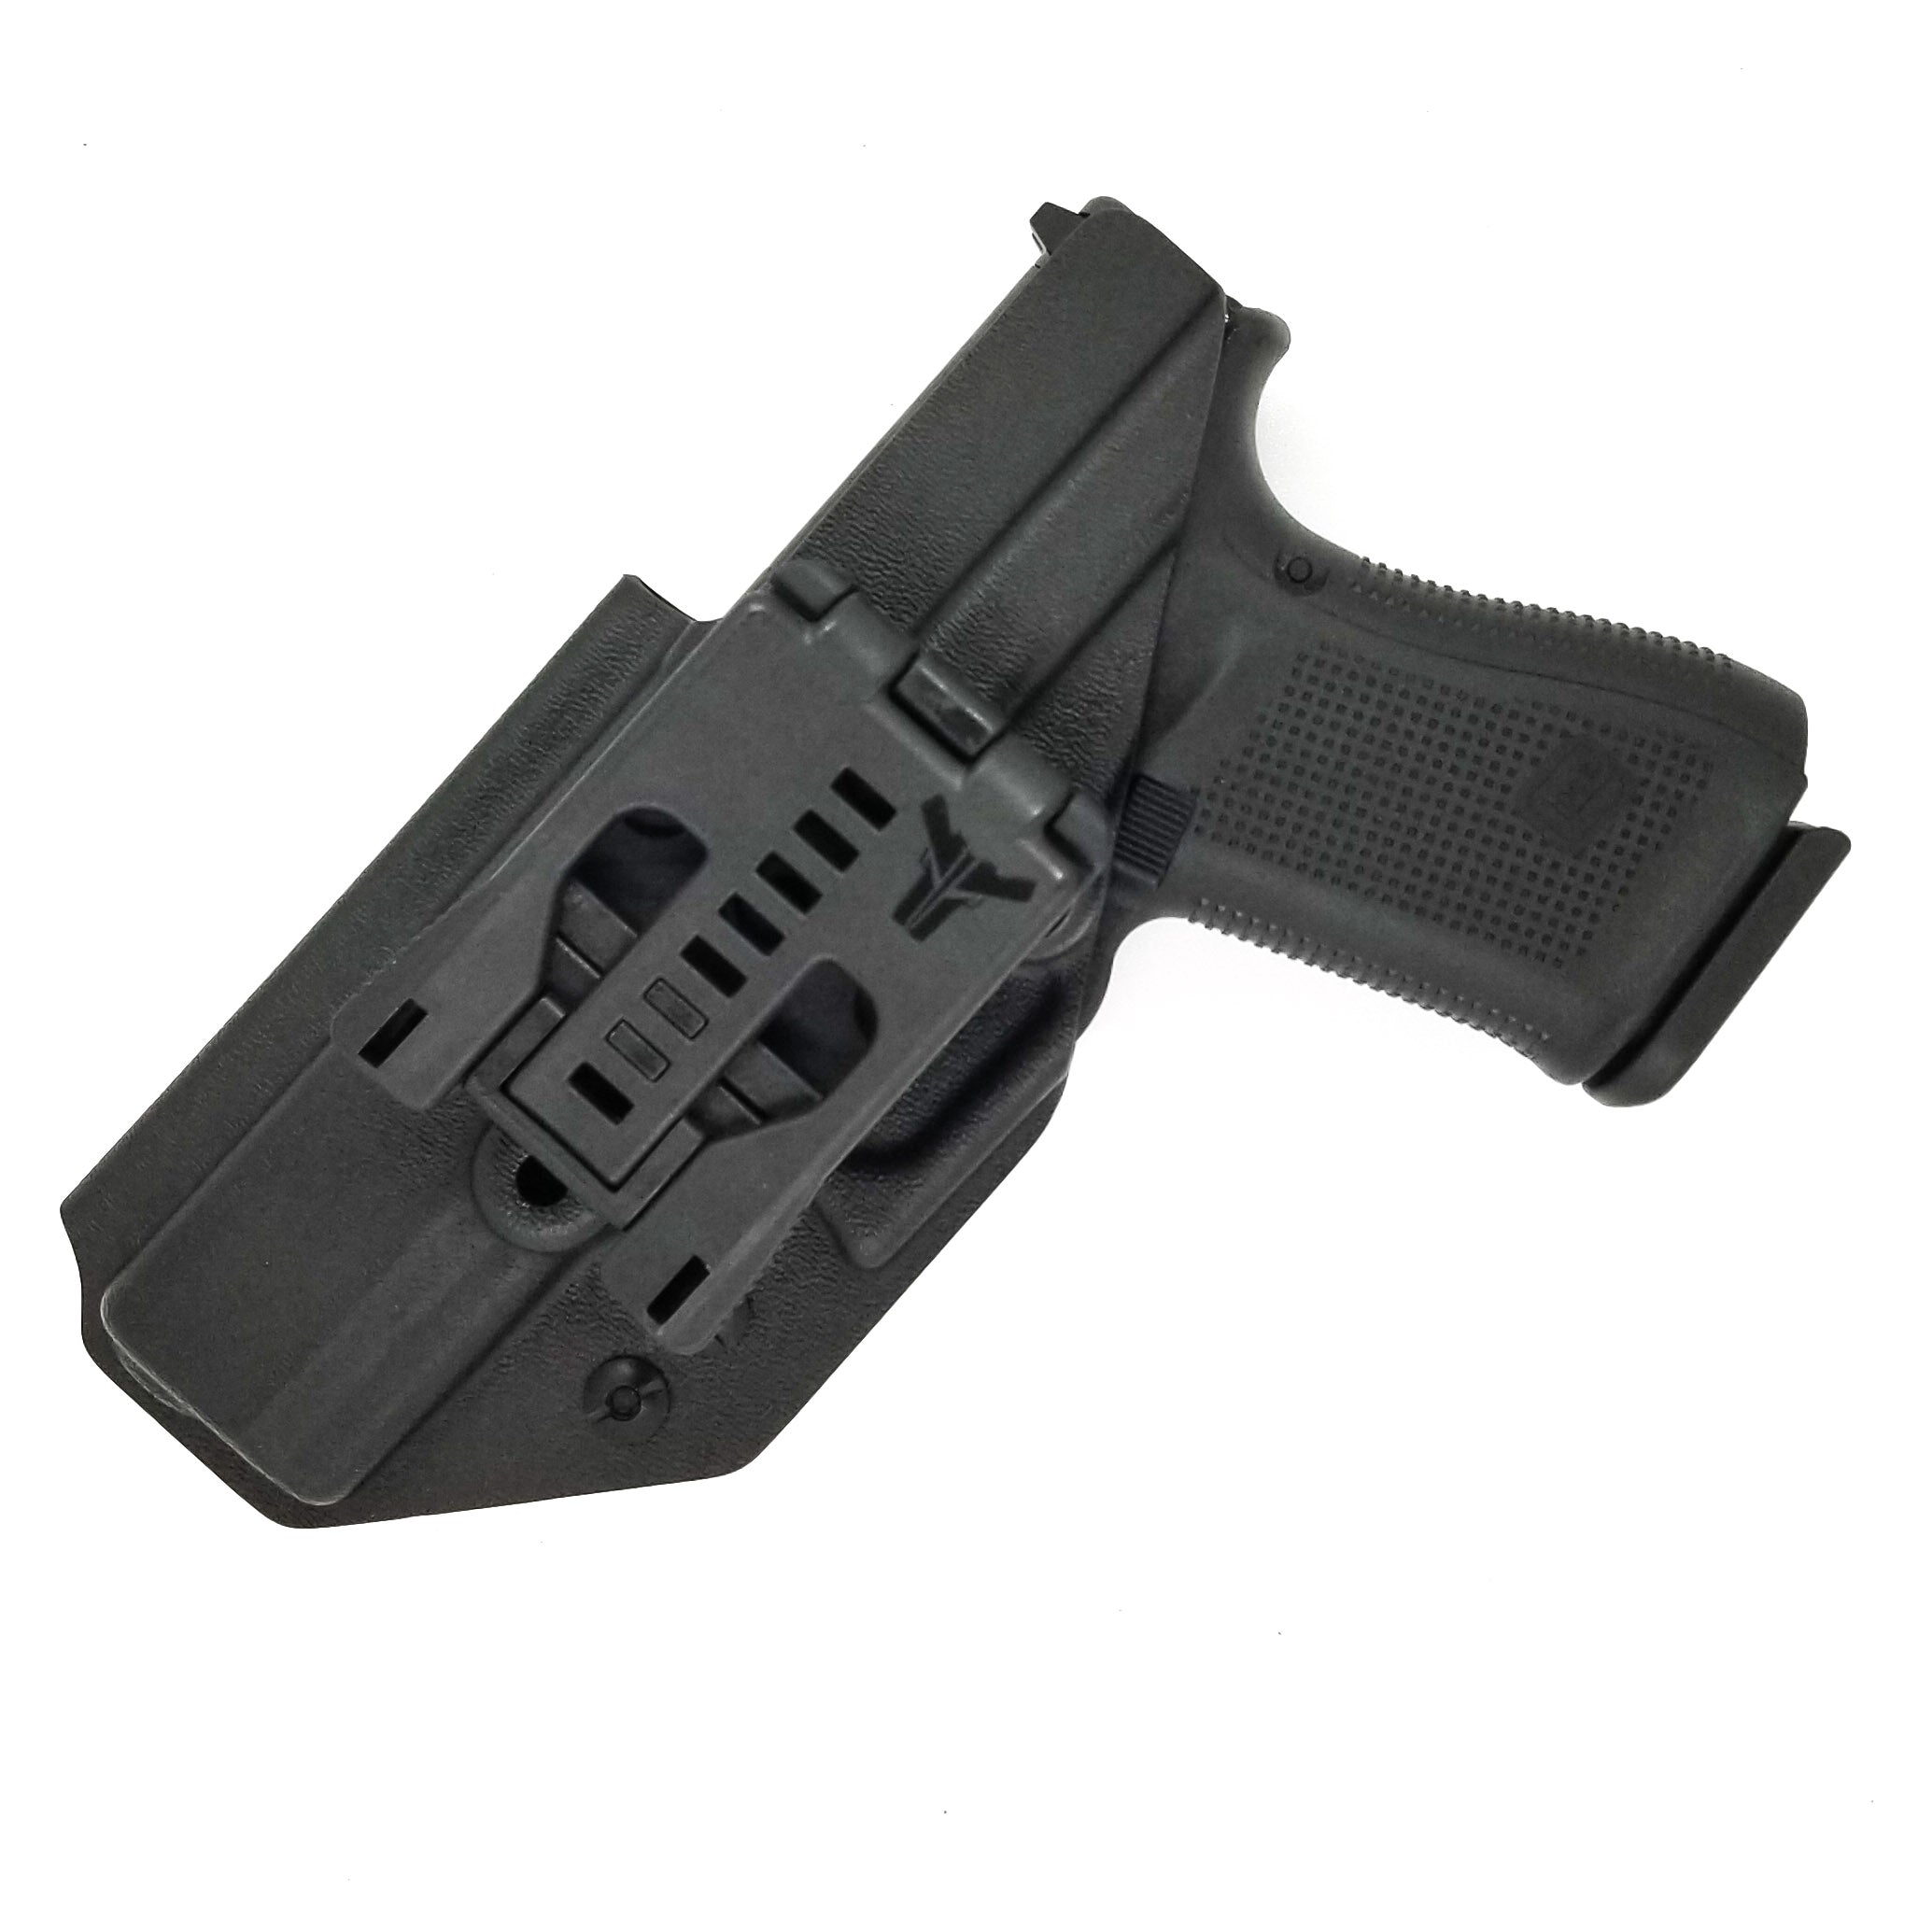 Outside Waistband Holster for the Glock 17, 22, 17 MOS, 22 MOS, Gen 4, Gen 5, Glock compact, Glock full size 9mm and 40 S&W frame pistols. Holster will fit 19, 23, 45 and others in the size family. Holster is cleared for a red dot sight. Adjustable Retention, molded with .080" Kydex, made in the USA.